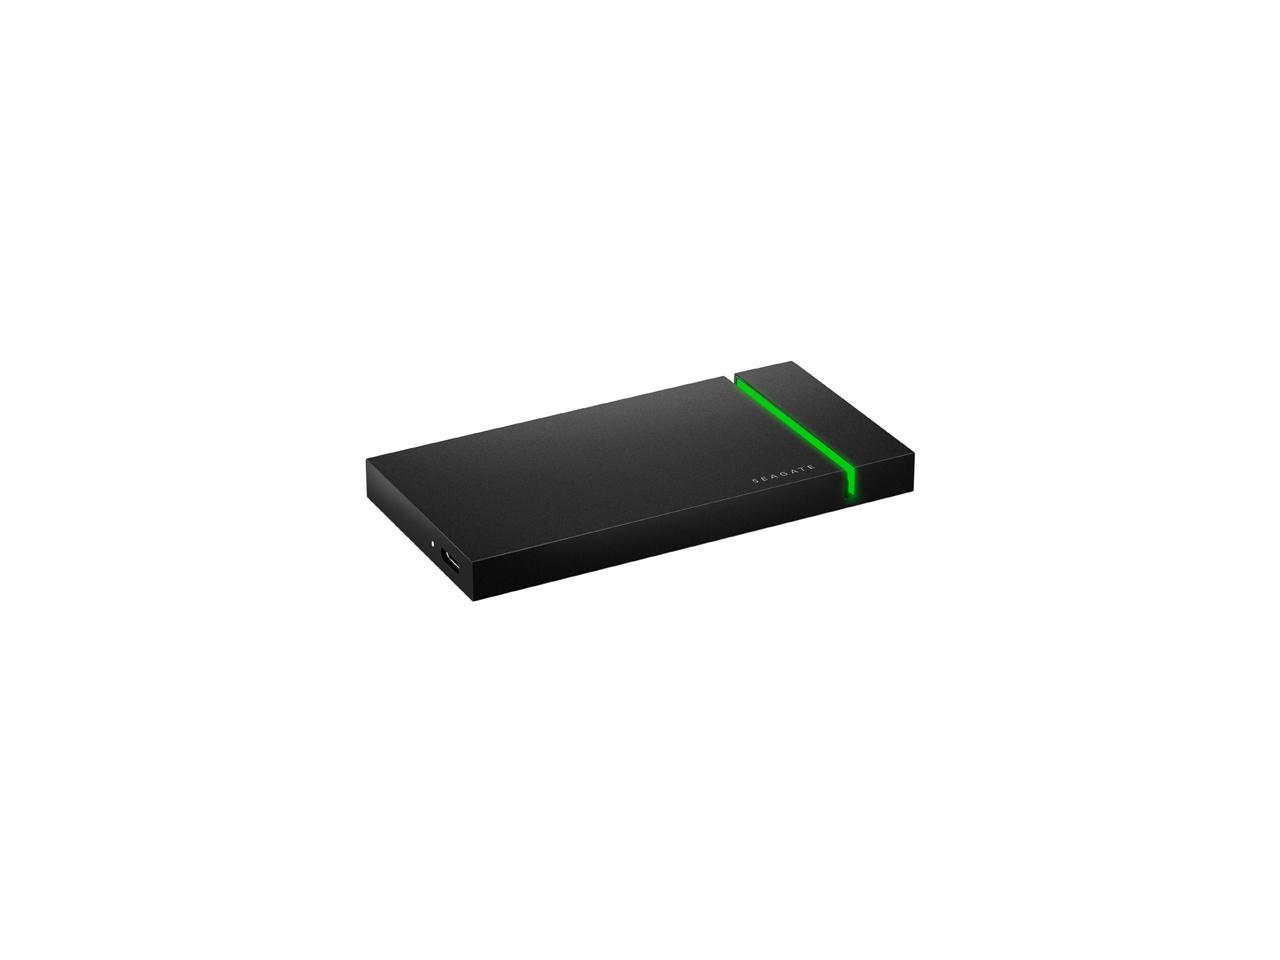 Seagate Firecuda Gaming SSD 1TB External Solid State Drive - USB-C USB 3.2 Gen 2x2 with NVMe for PC Laptop (STJP1000400)